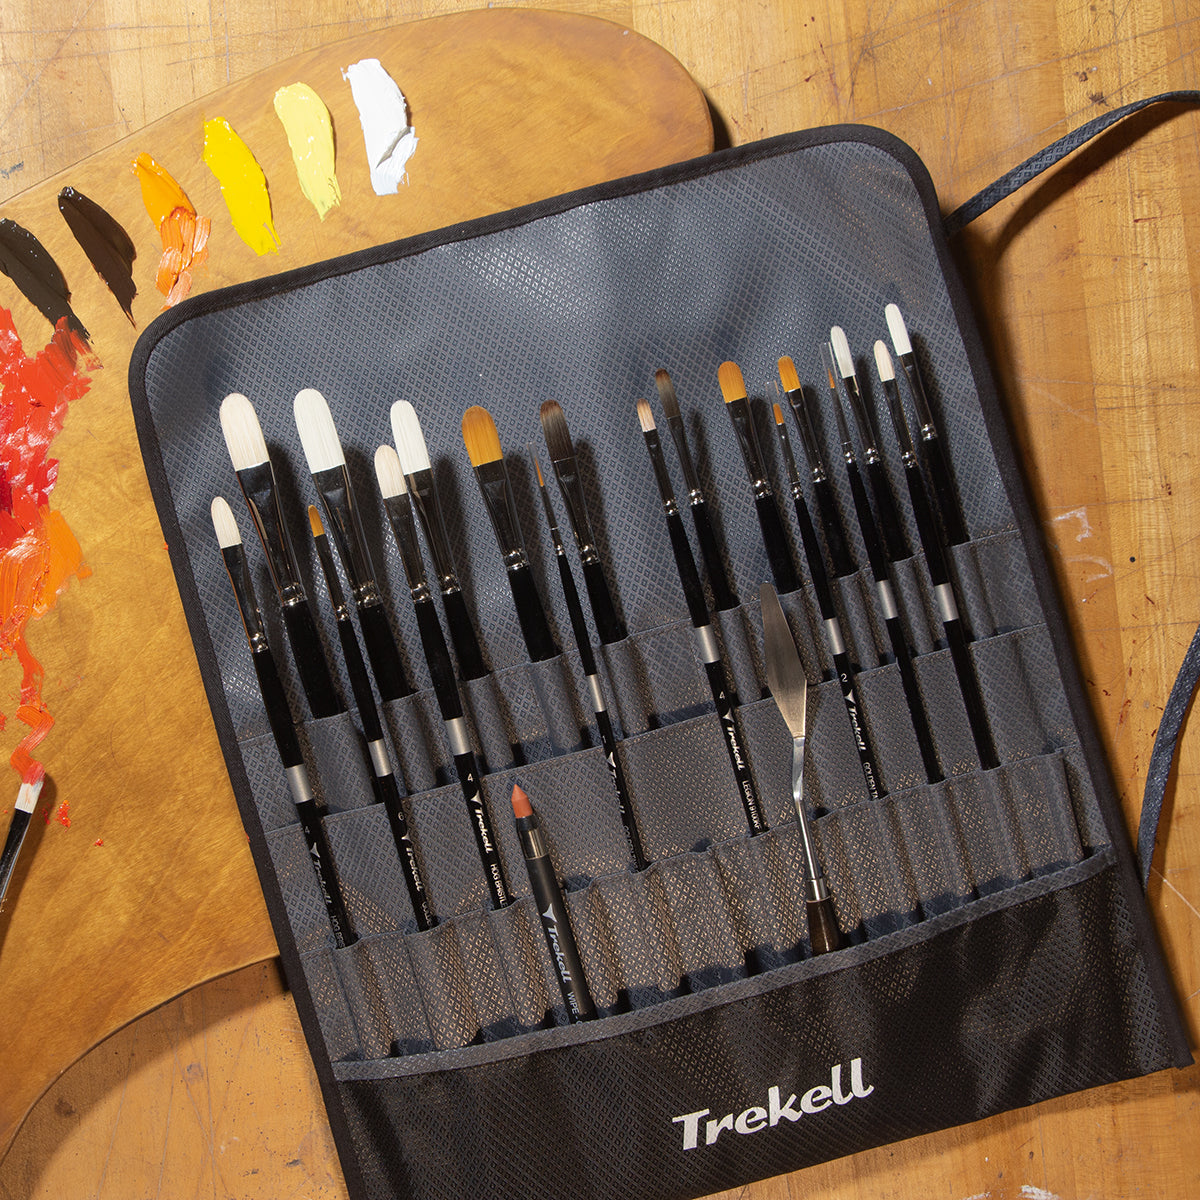 The Trekell Traveler - Organize and Protect Your Brushes in Style - Trekell Art Supplies